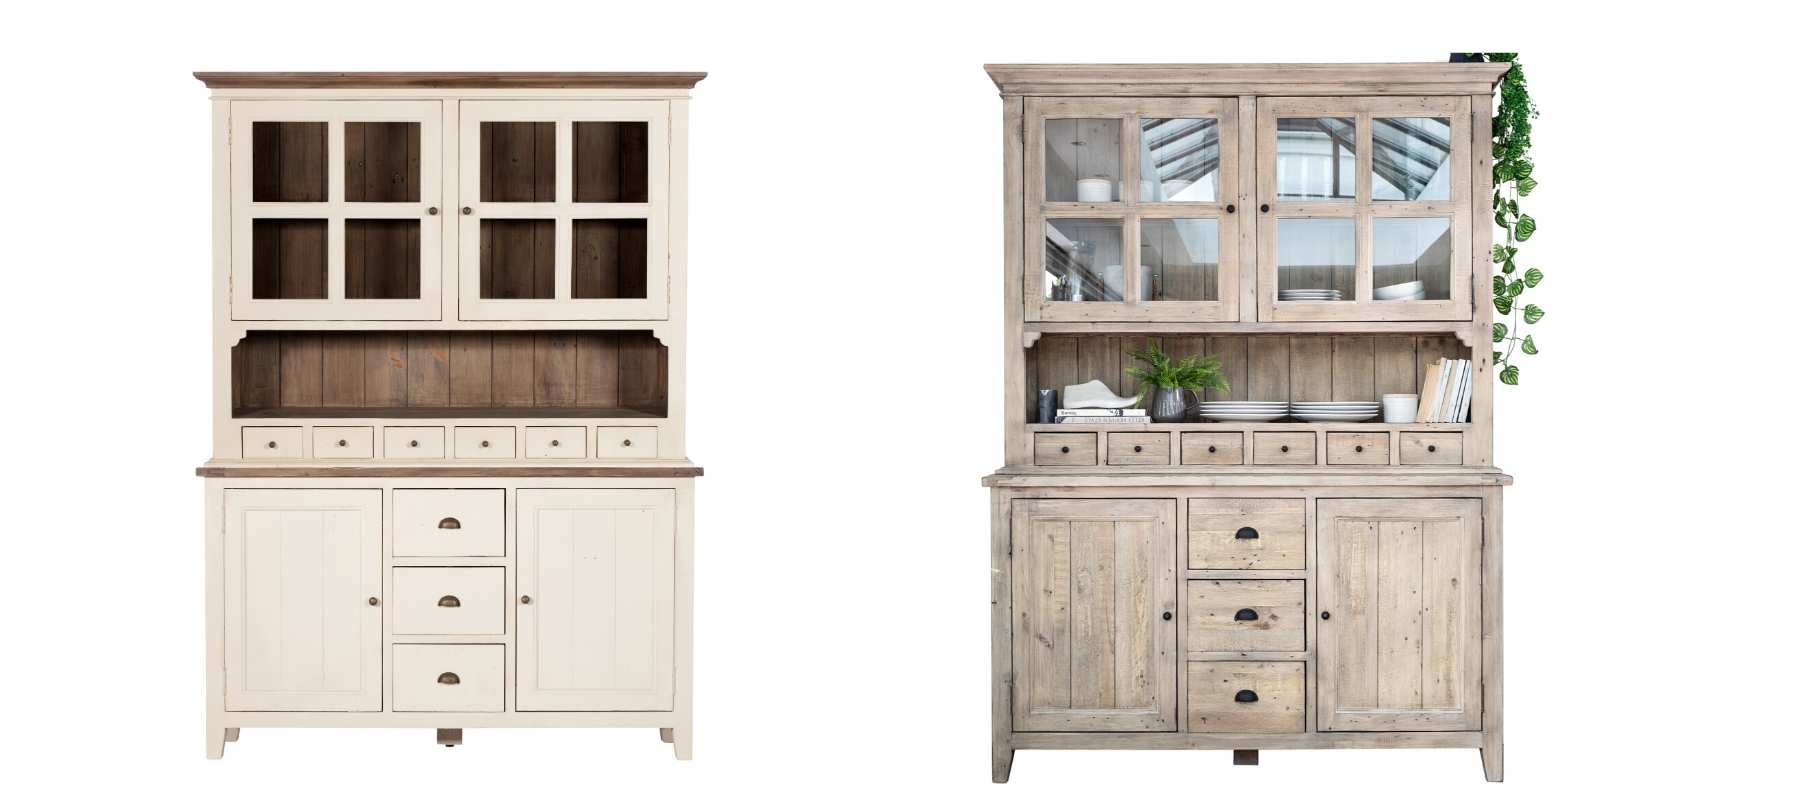 Two cut outs of wooden dressers, one white painted and other natural wood